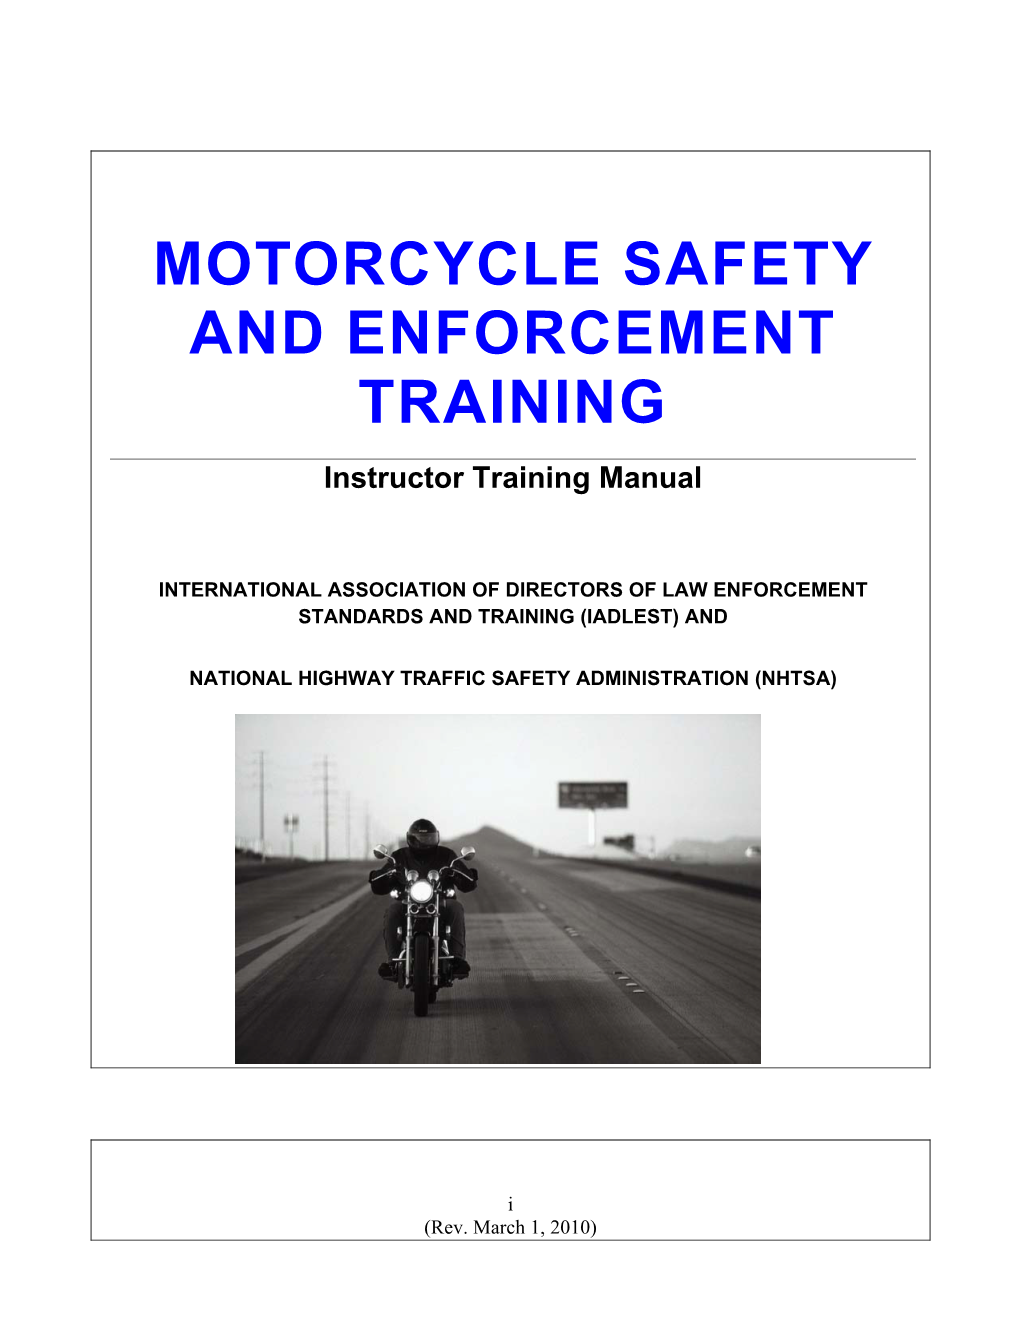 Training for the Enforcement of Motorcycle Laws